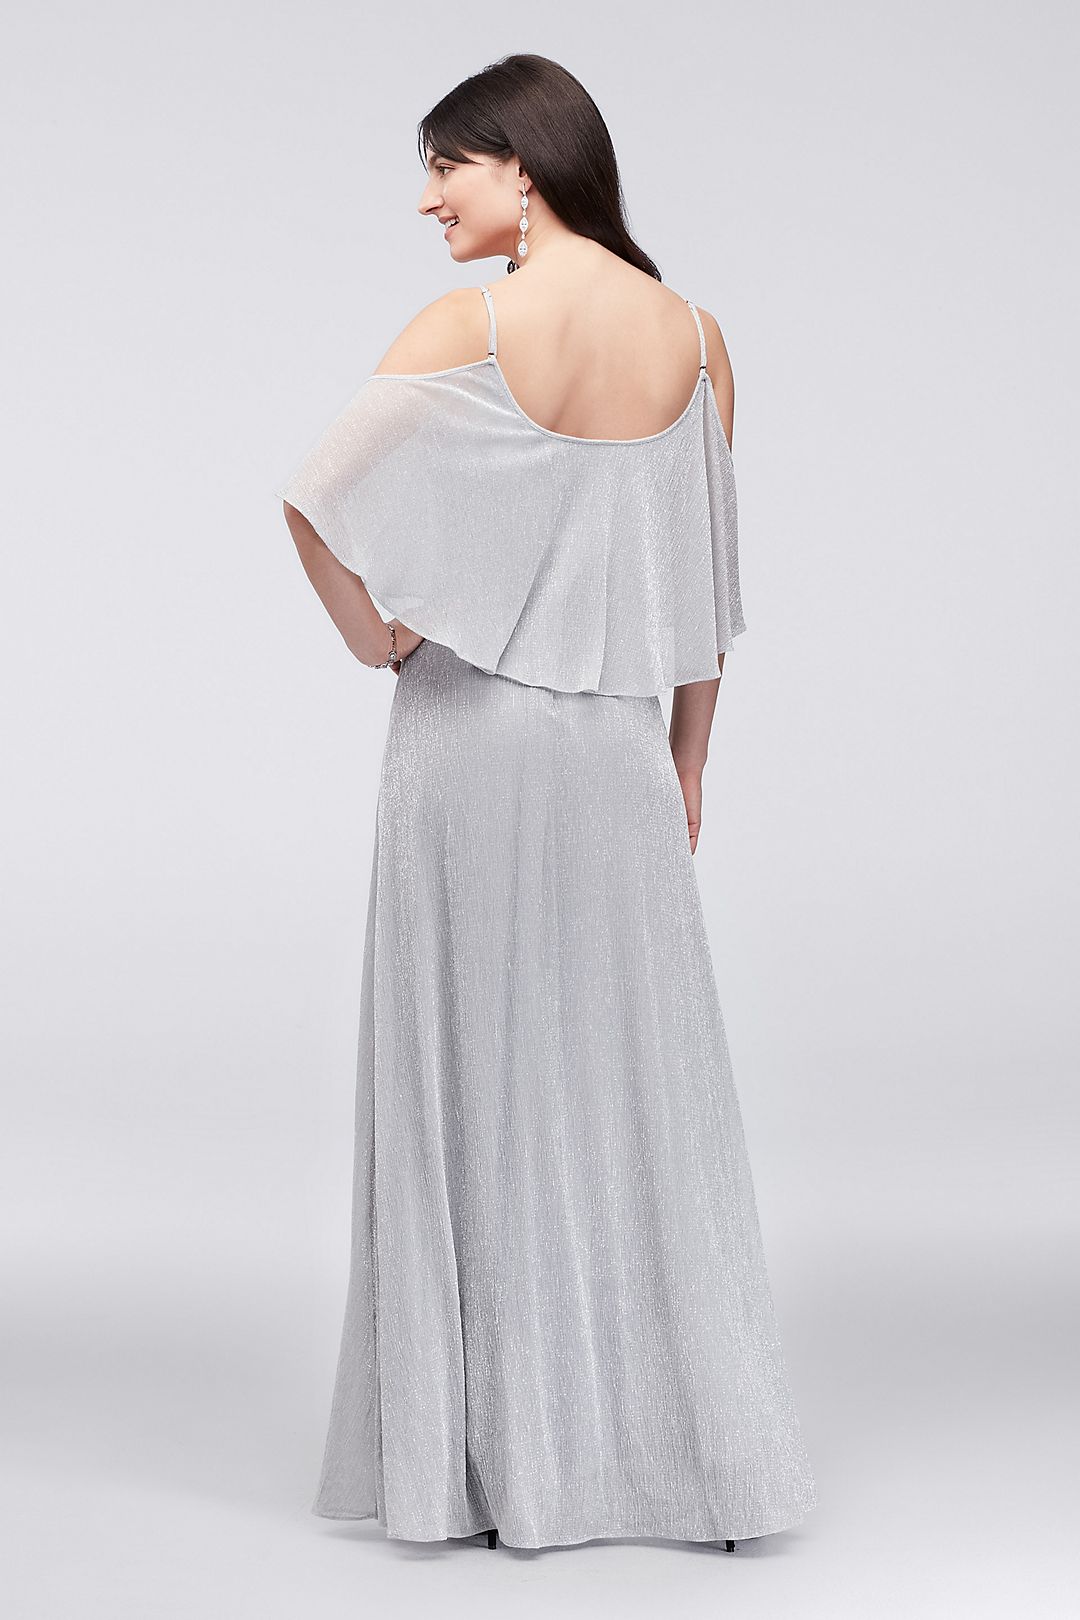 Sparkling Off-the-Shoulder Dress with Flounce Image 4